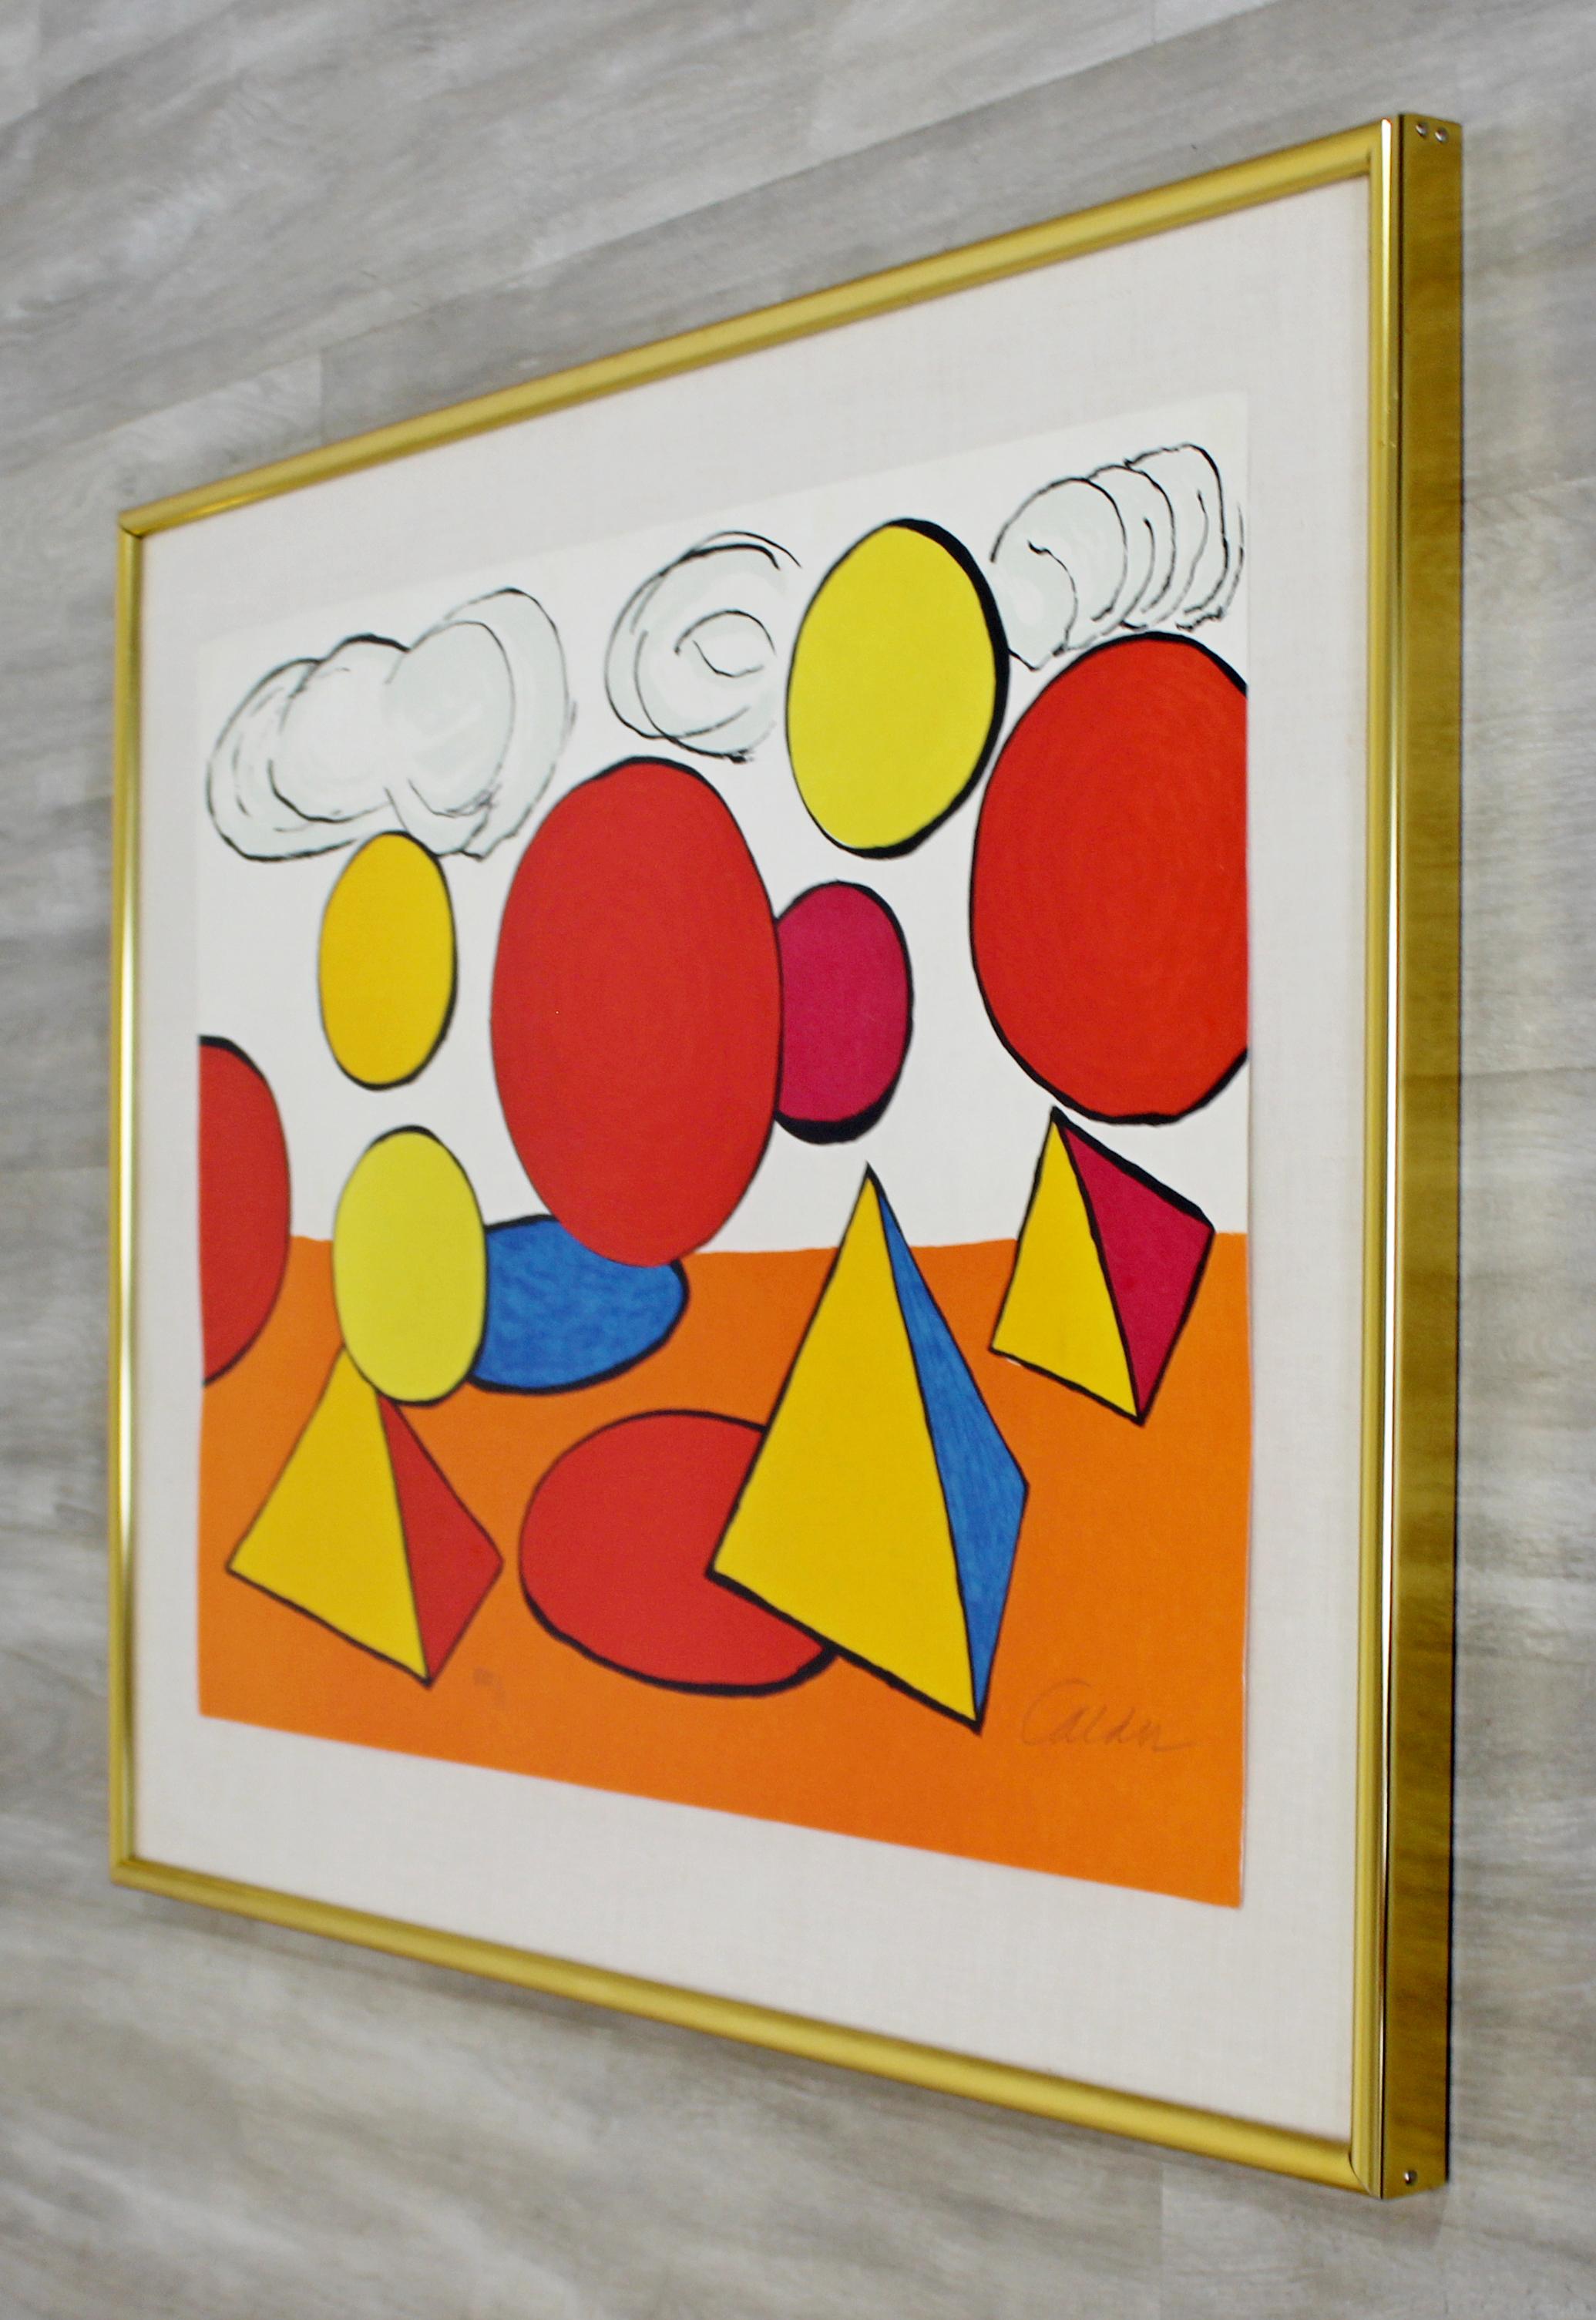 American Mid-Century Modern Framed Signed Calder Pyramid Lithograph Orange Red Shapes